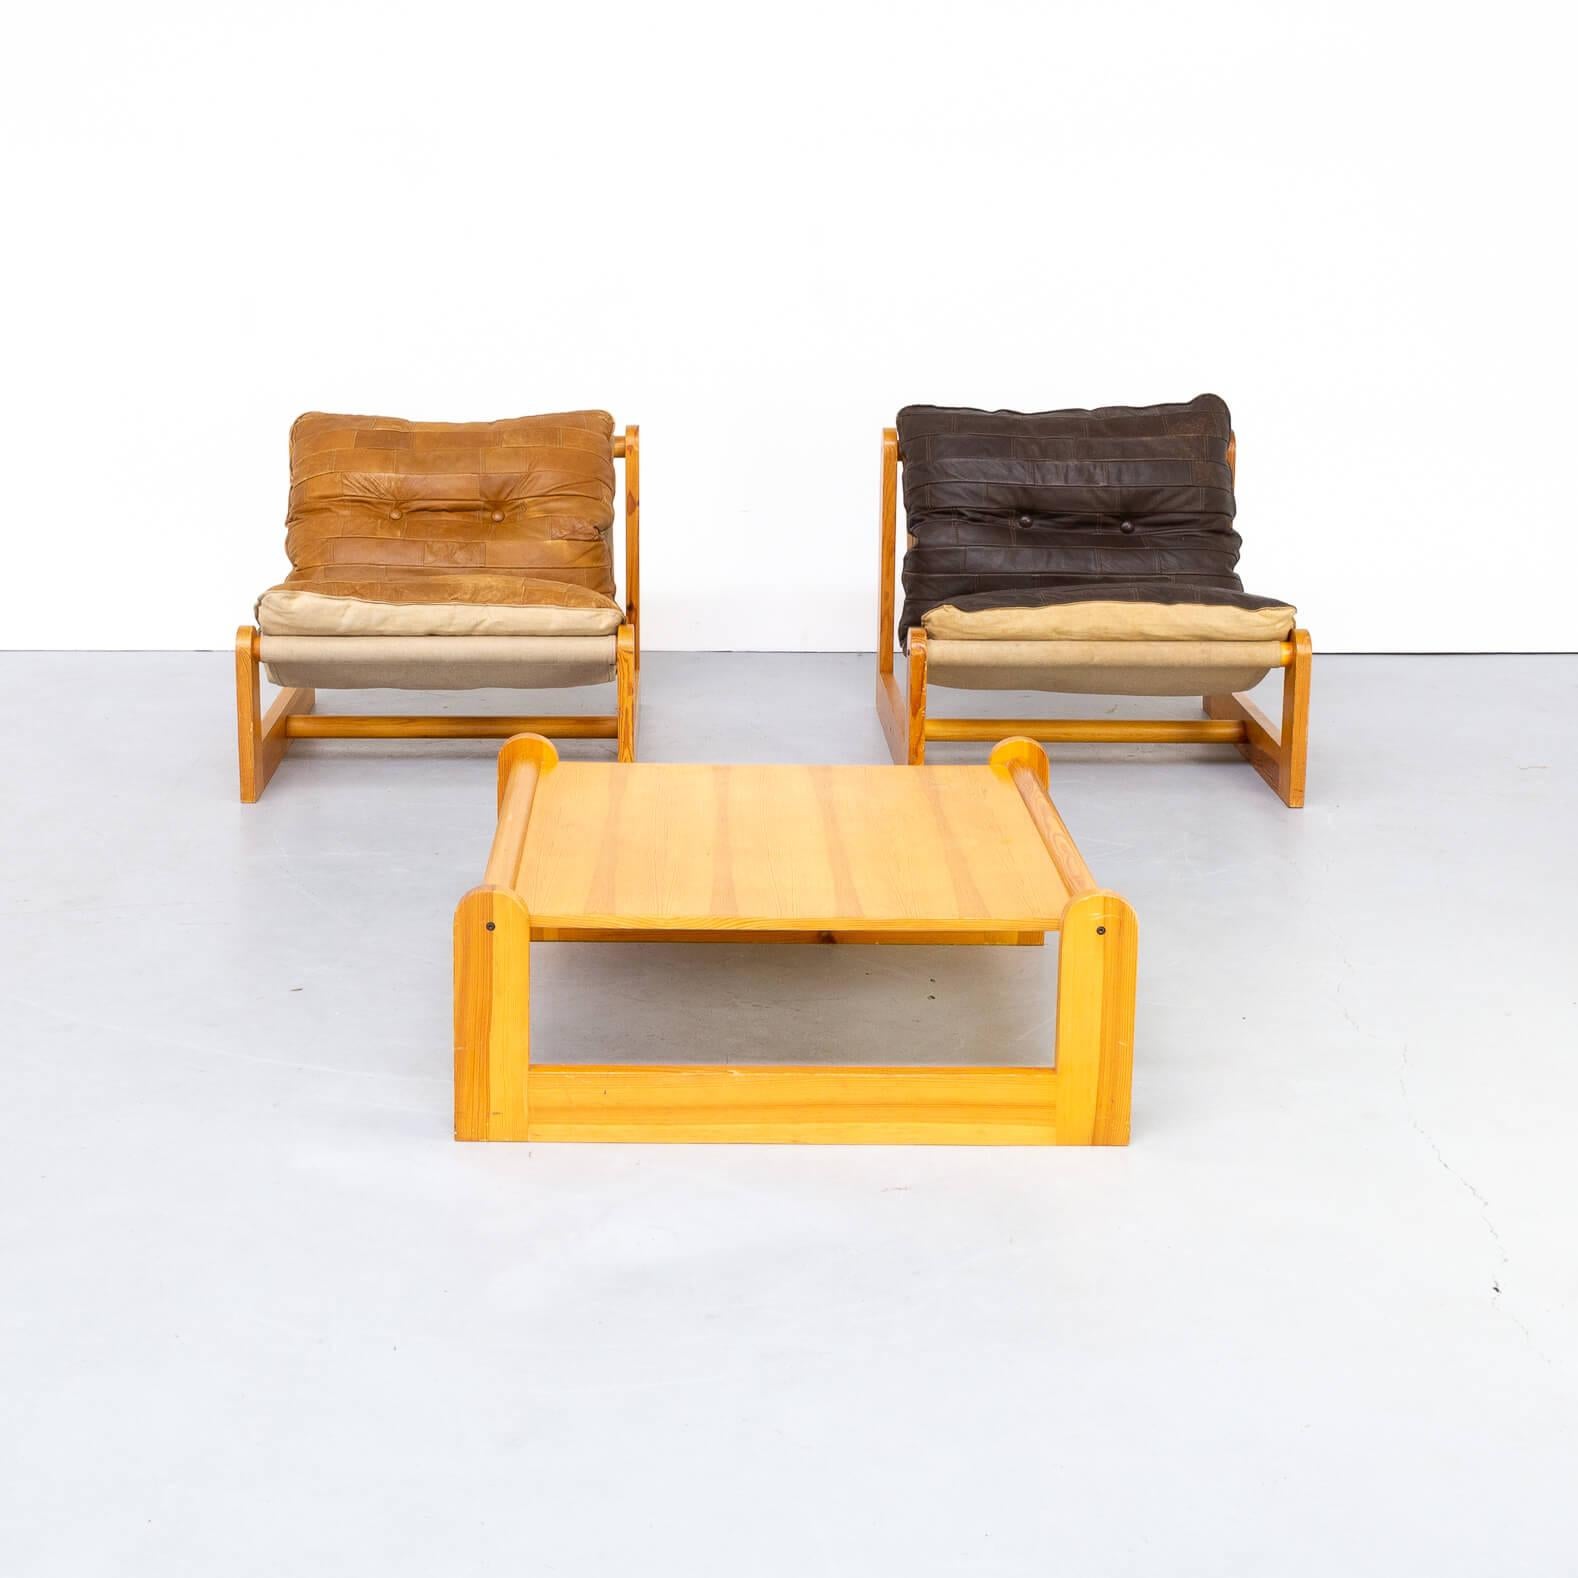 Mid-Century Modern 70s Pine Wood, Leather Low Chair Lounge Fauteuil and Table, Set/3 For Sale